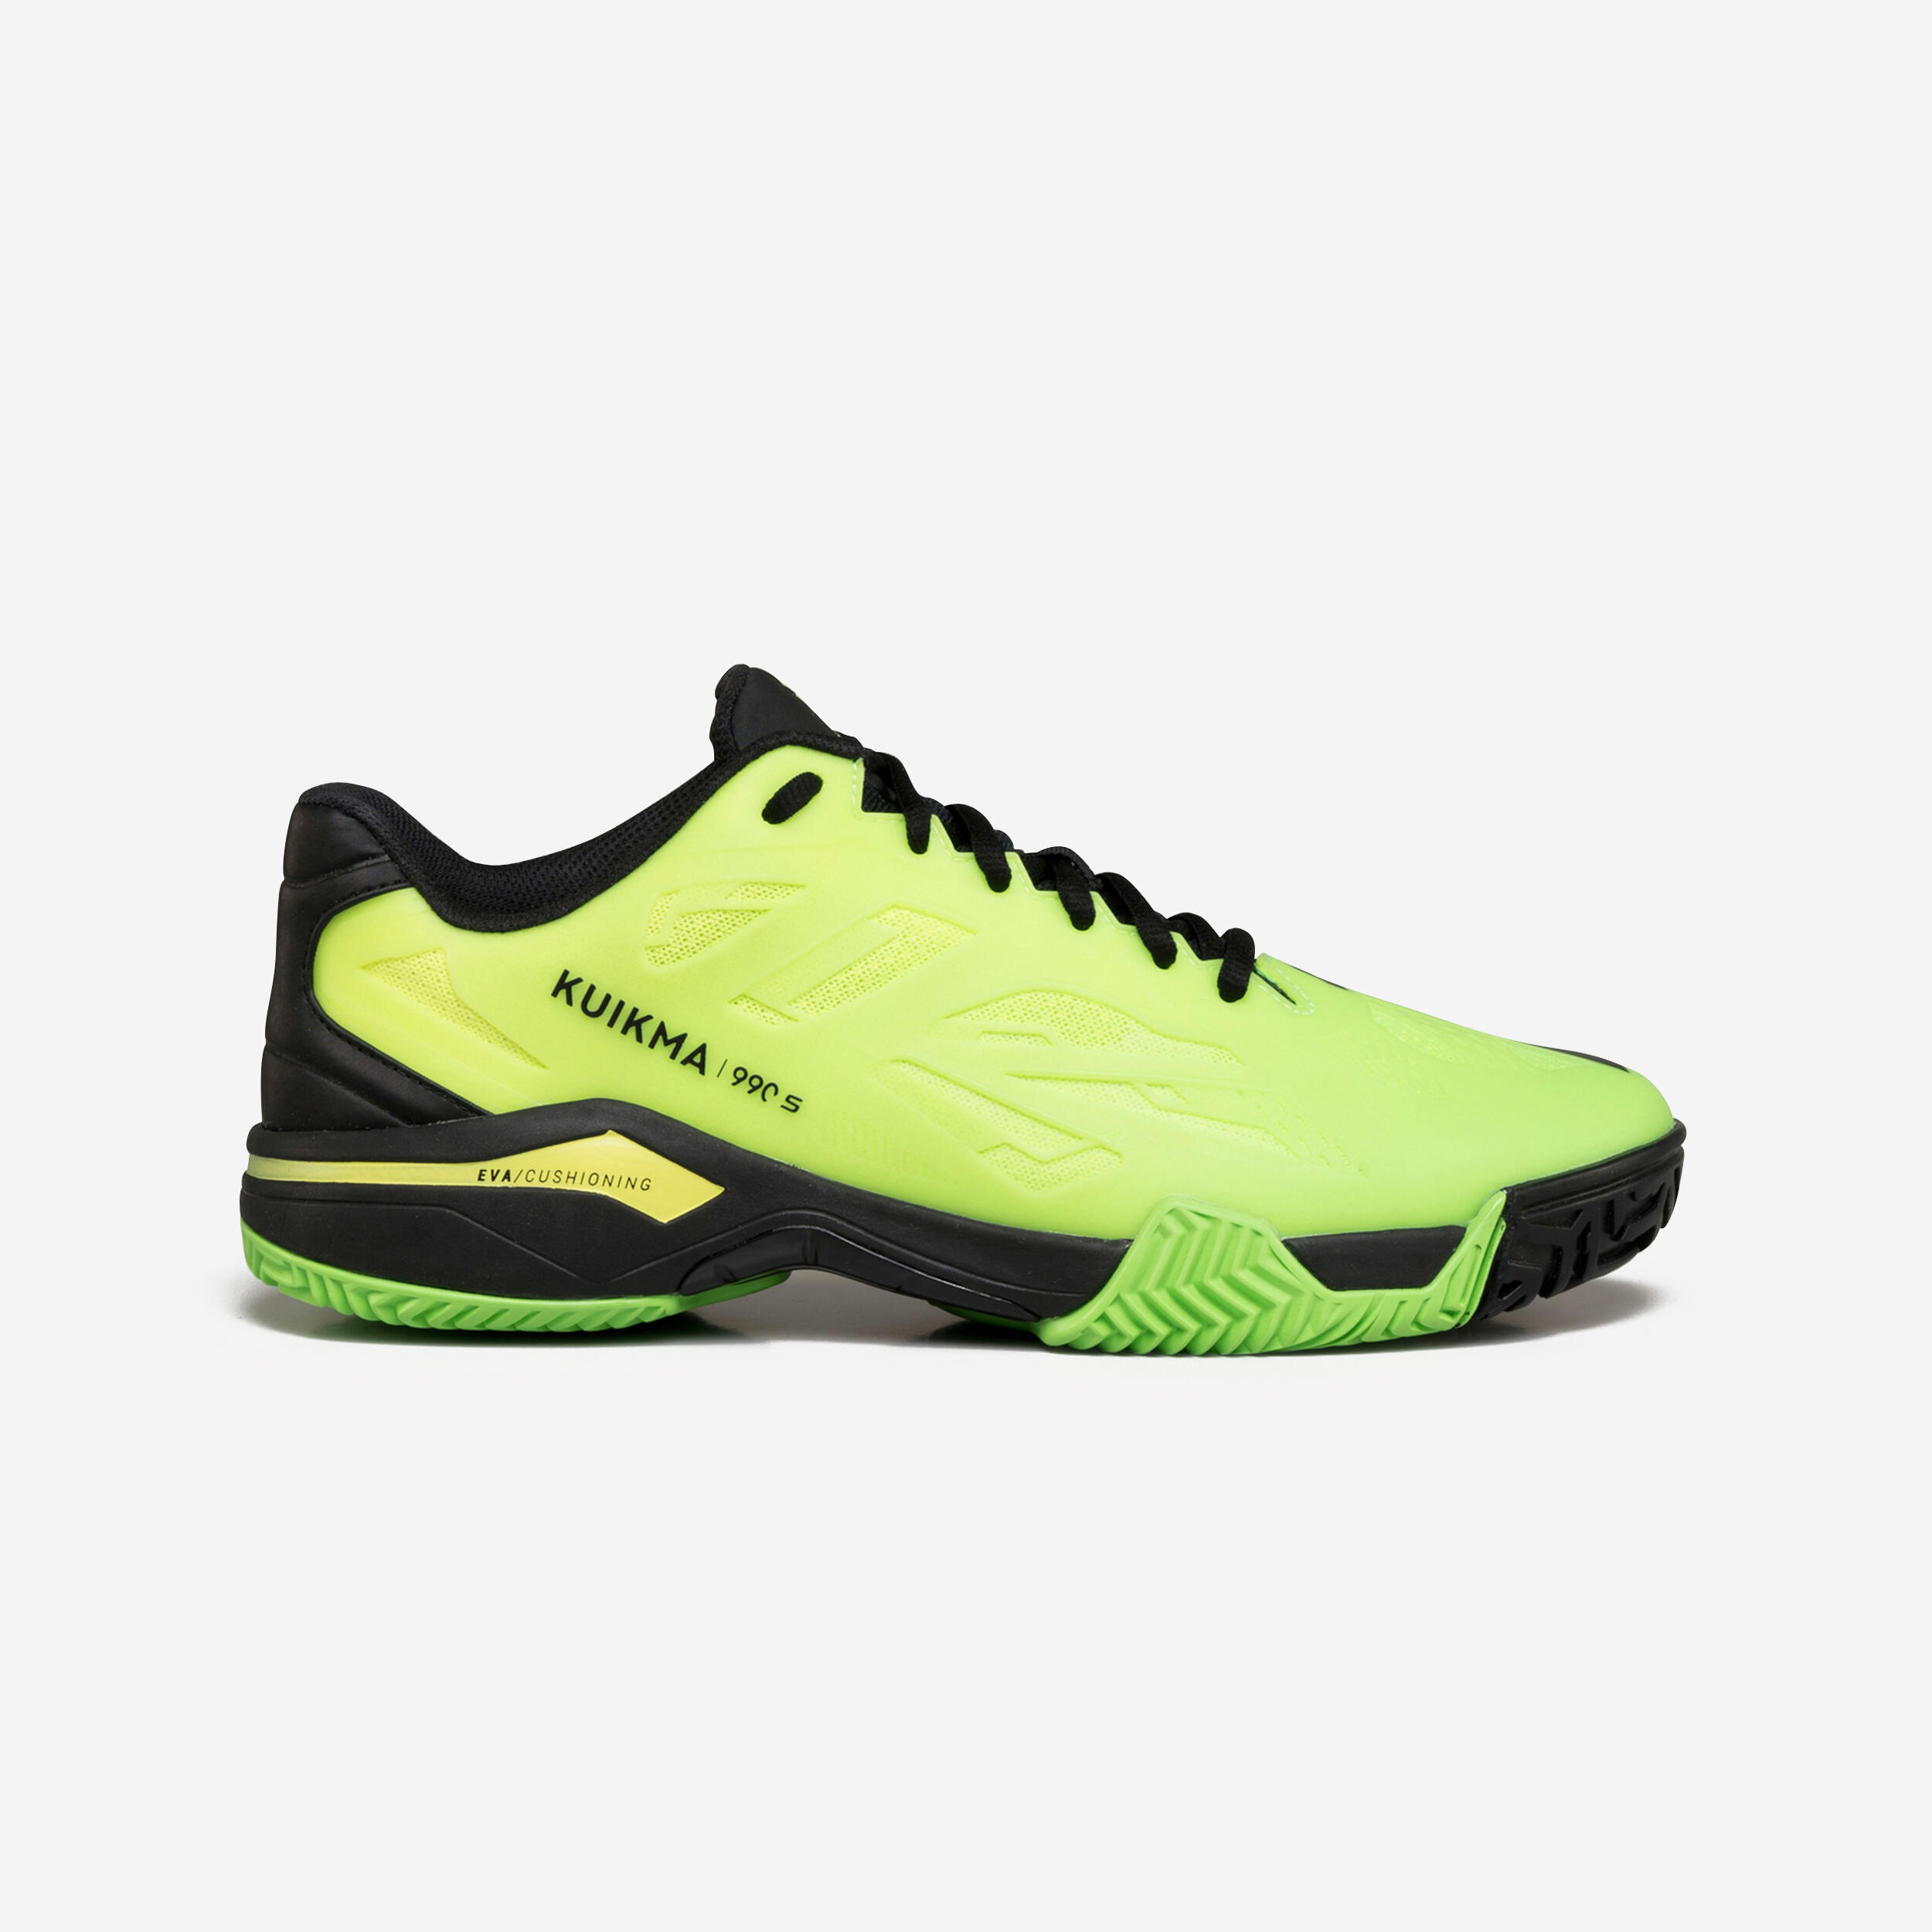 fluo neon green / fluo yellow